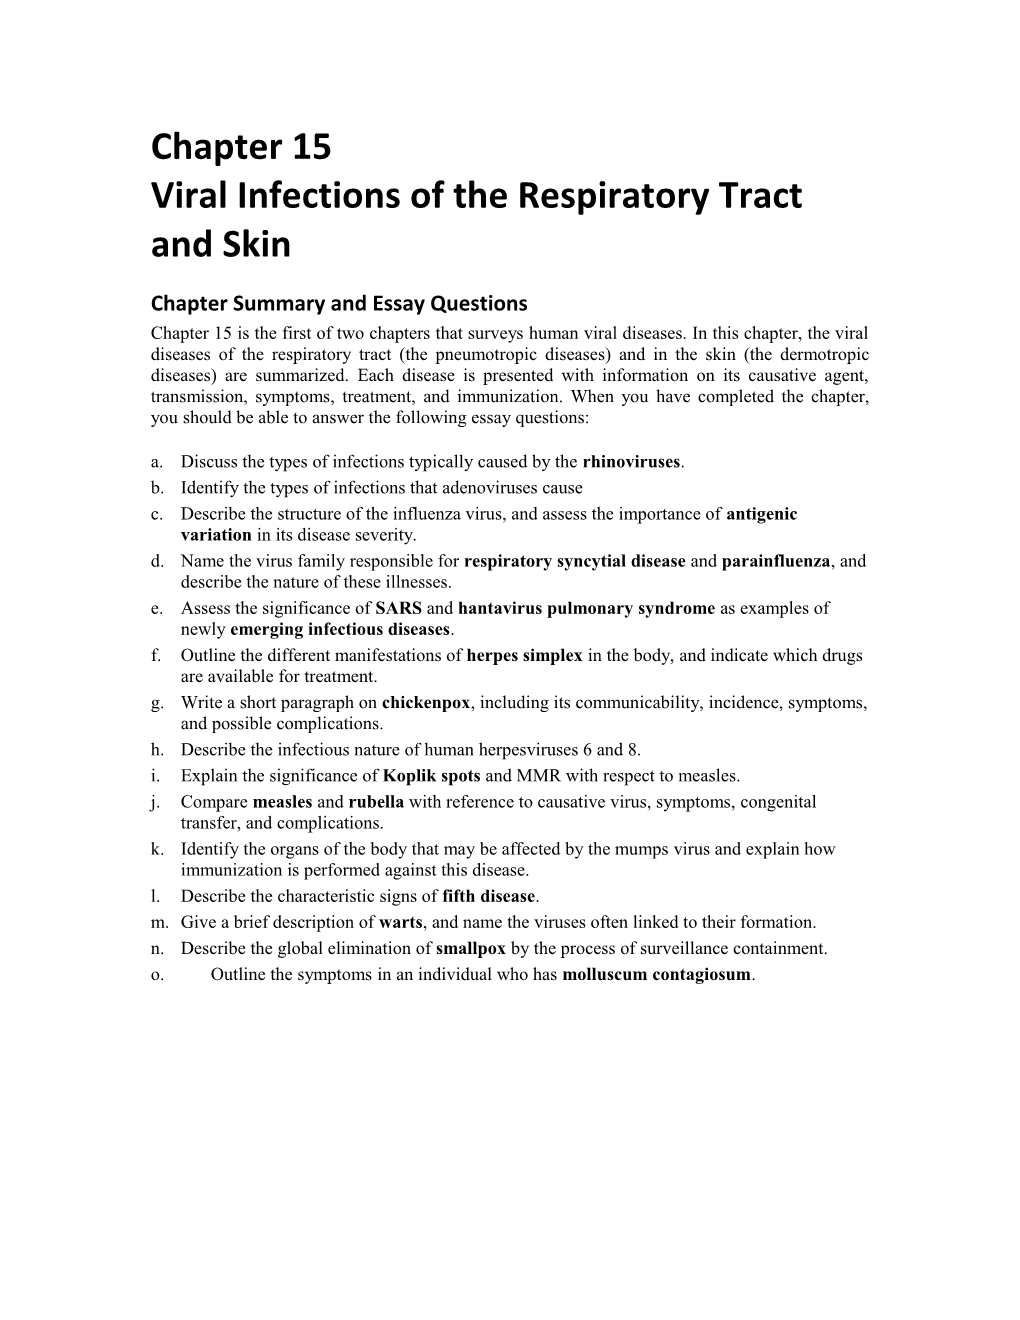 Viral Infections of the Respiratory Tract and Skin